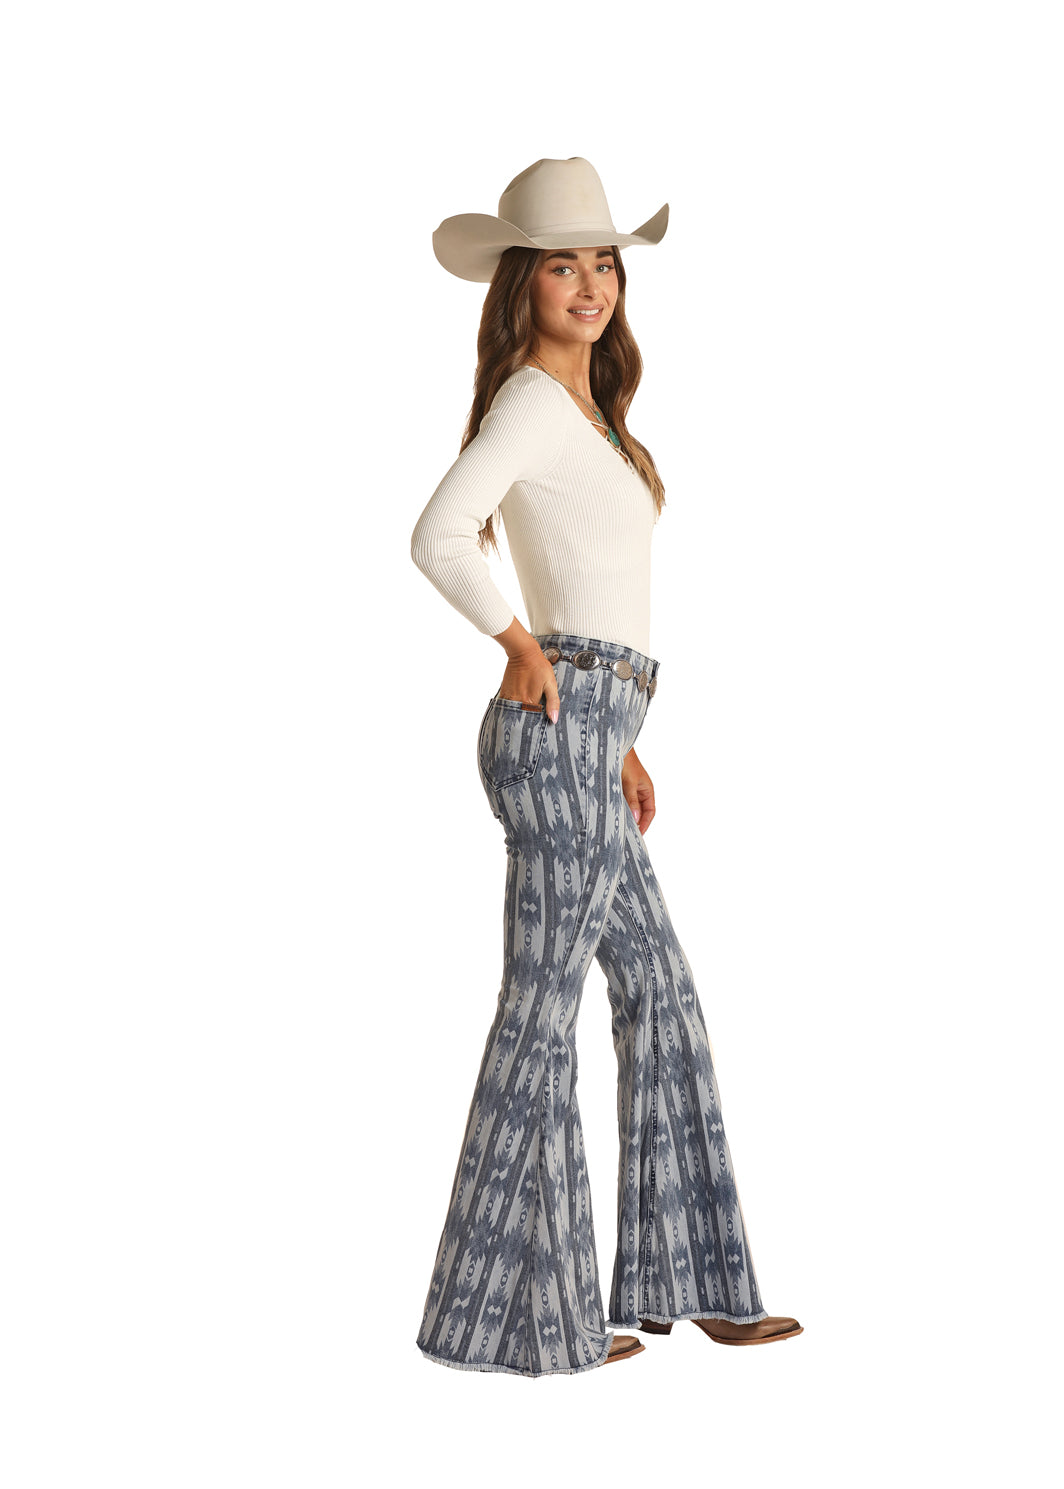 ROCK & ROLL COWGIRL HIGH RISE EXTRA STRETCH AZTEC PRINT BELL BOTTOM JEANS